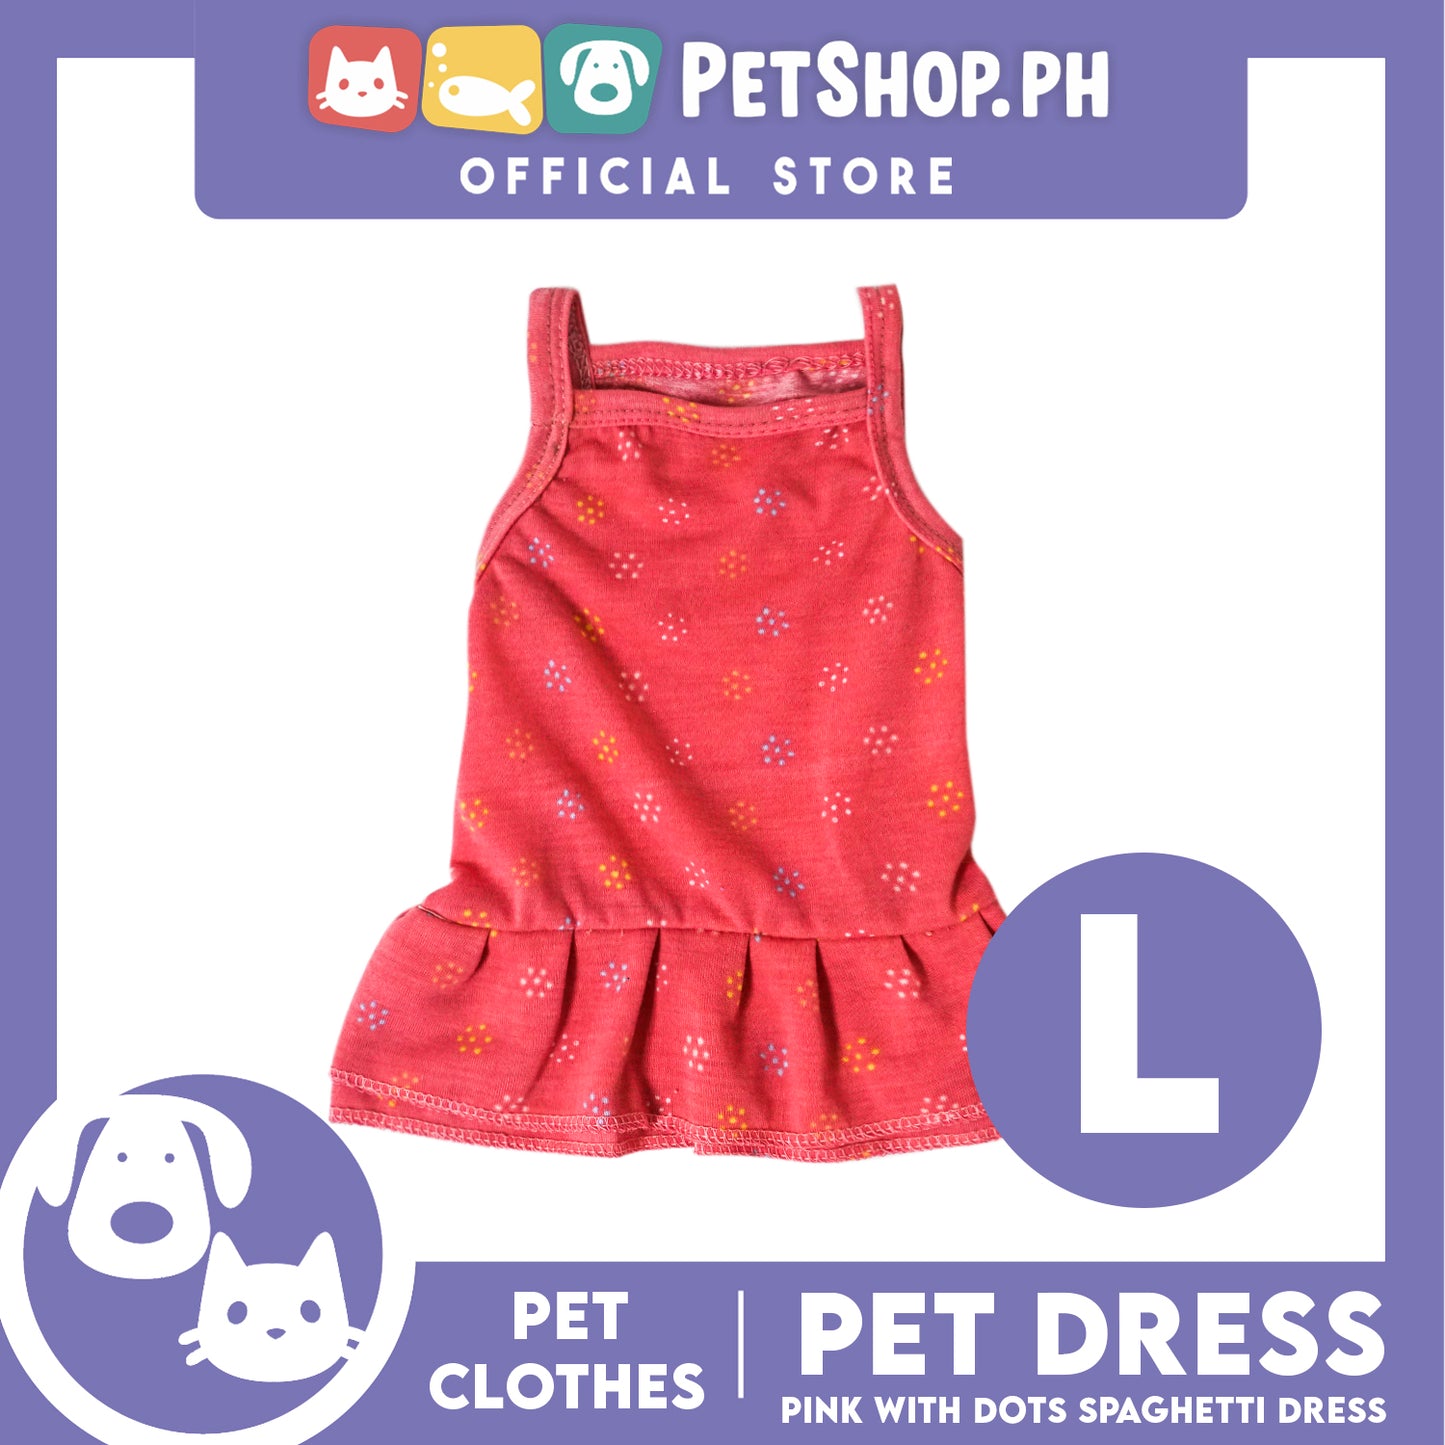 Pet Dress Pink with Dots (Large) Pet Clothes for Small Dog